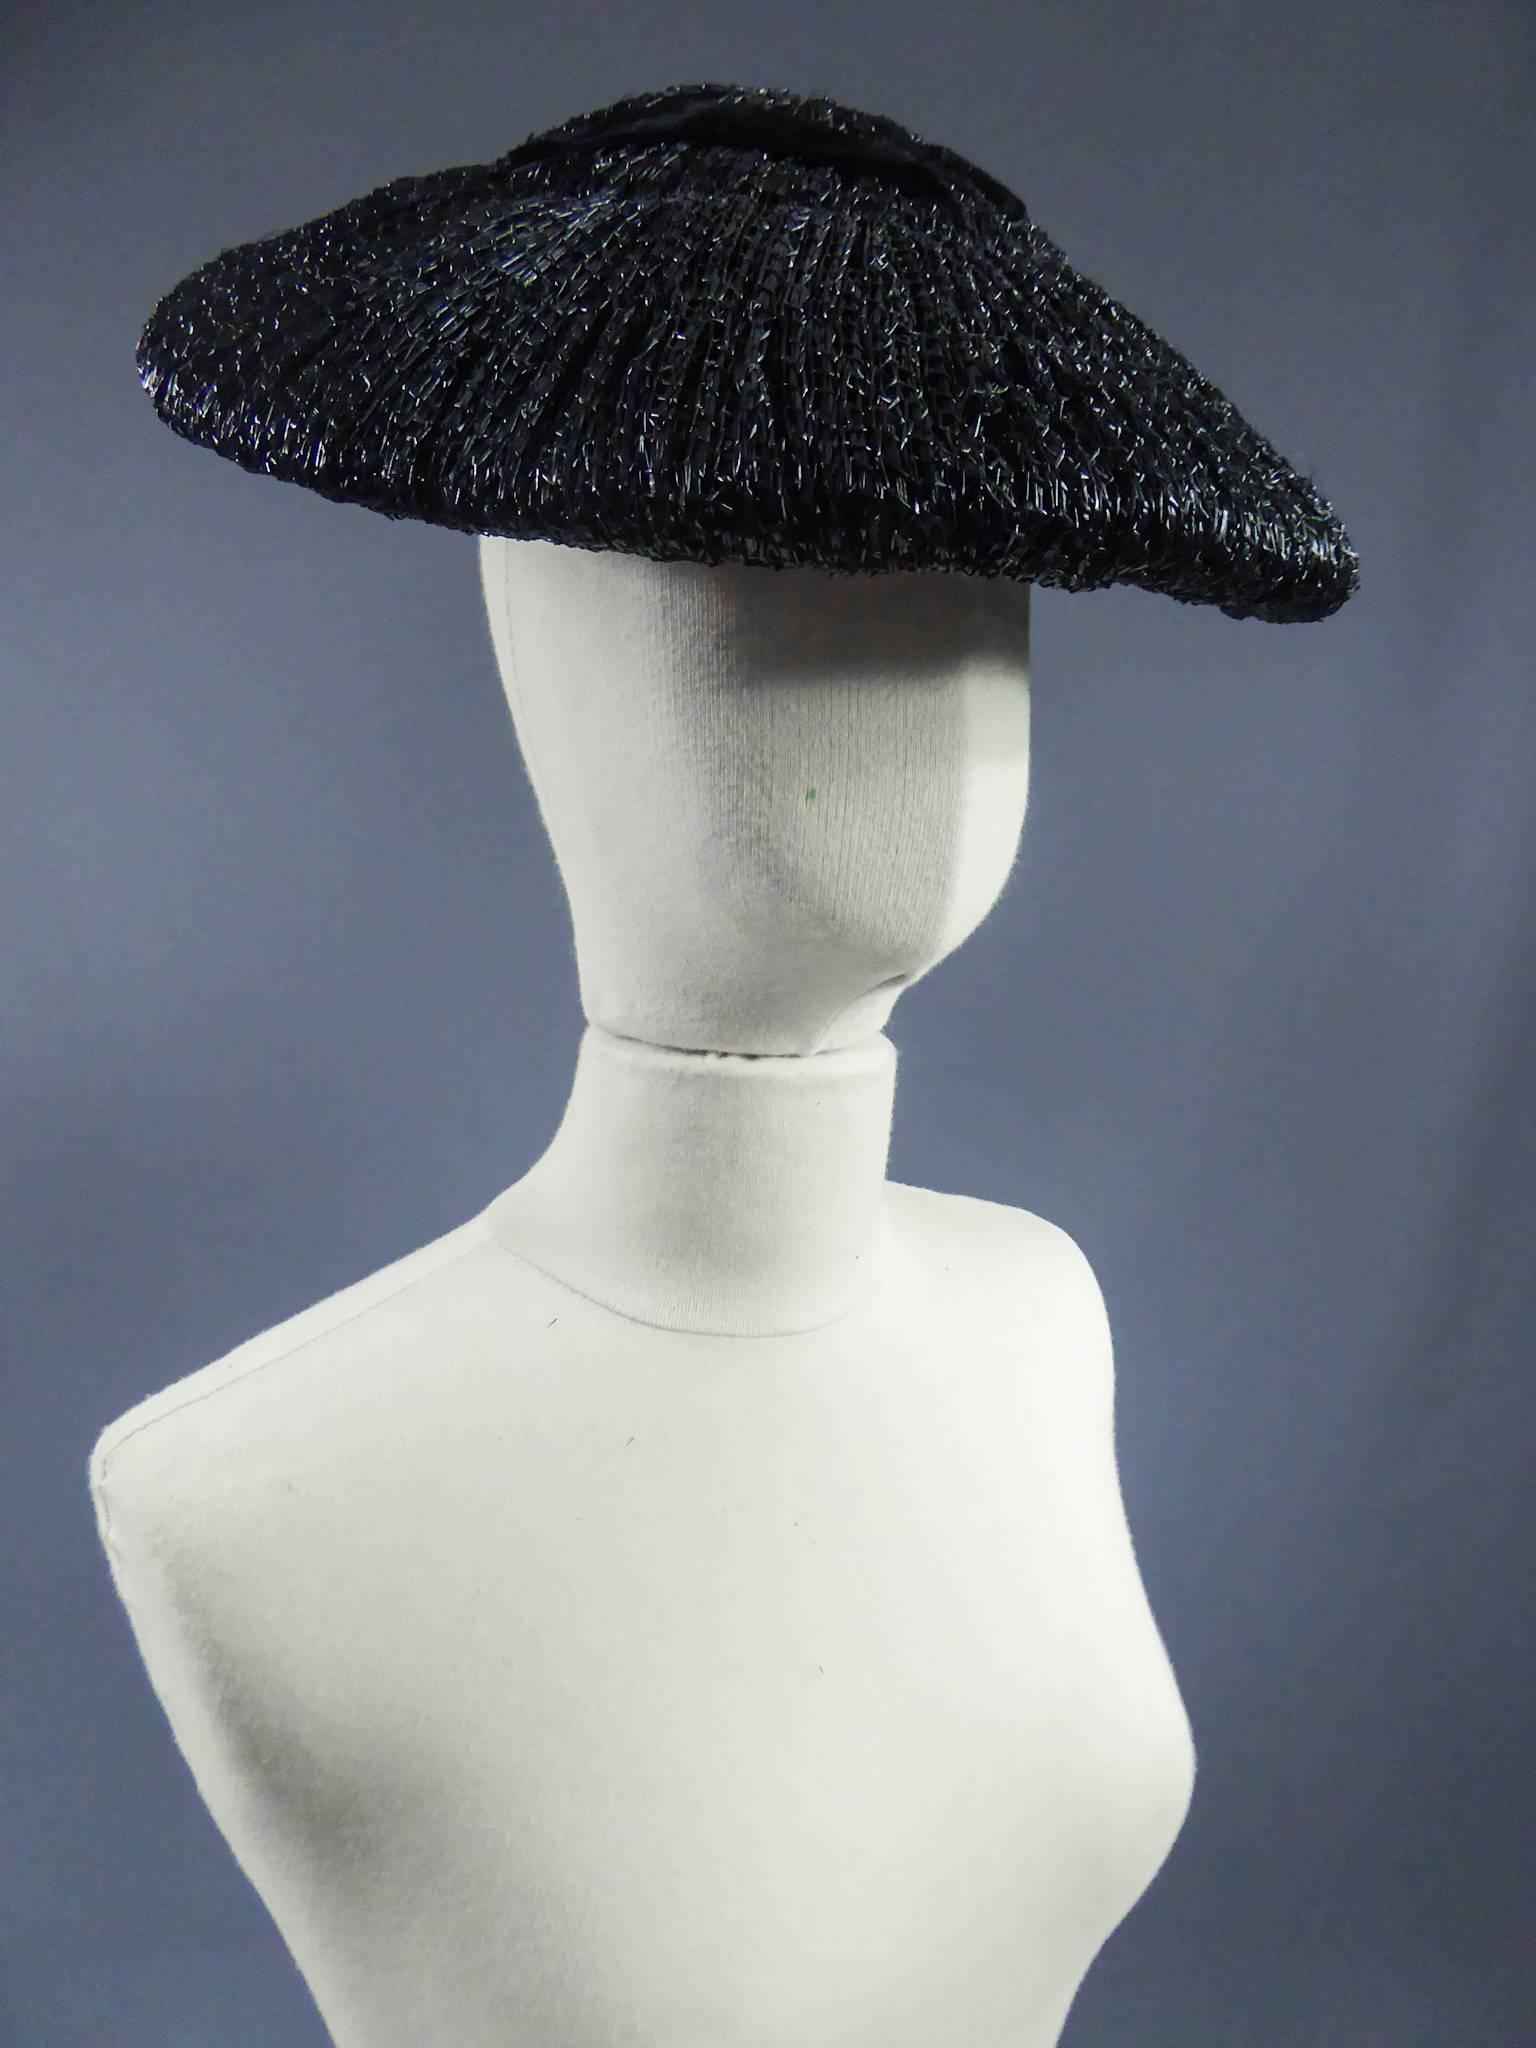 Circa 1947

France

Black straw hat with black velvet ribbon in the style of the New Look era Bar Suit silhouette from 1947. Ribbon inside.

Measurements : largest diameter 36 cm.
smallest diameter 35cm. gros grain interior : 15.5 cm.

